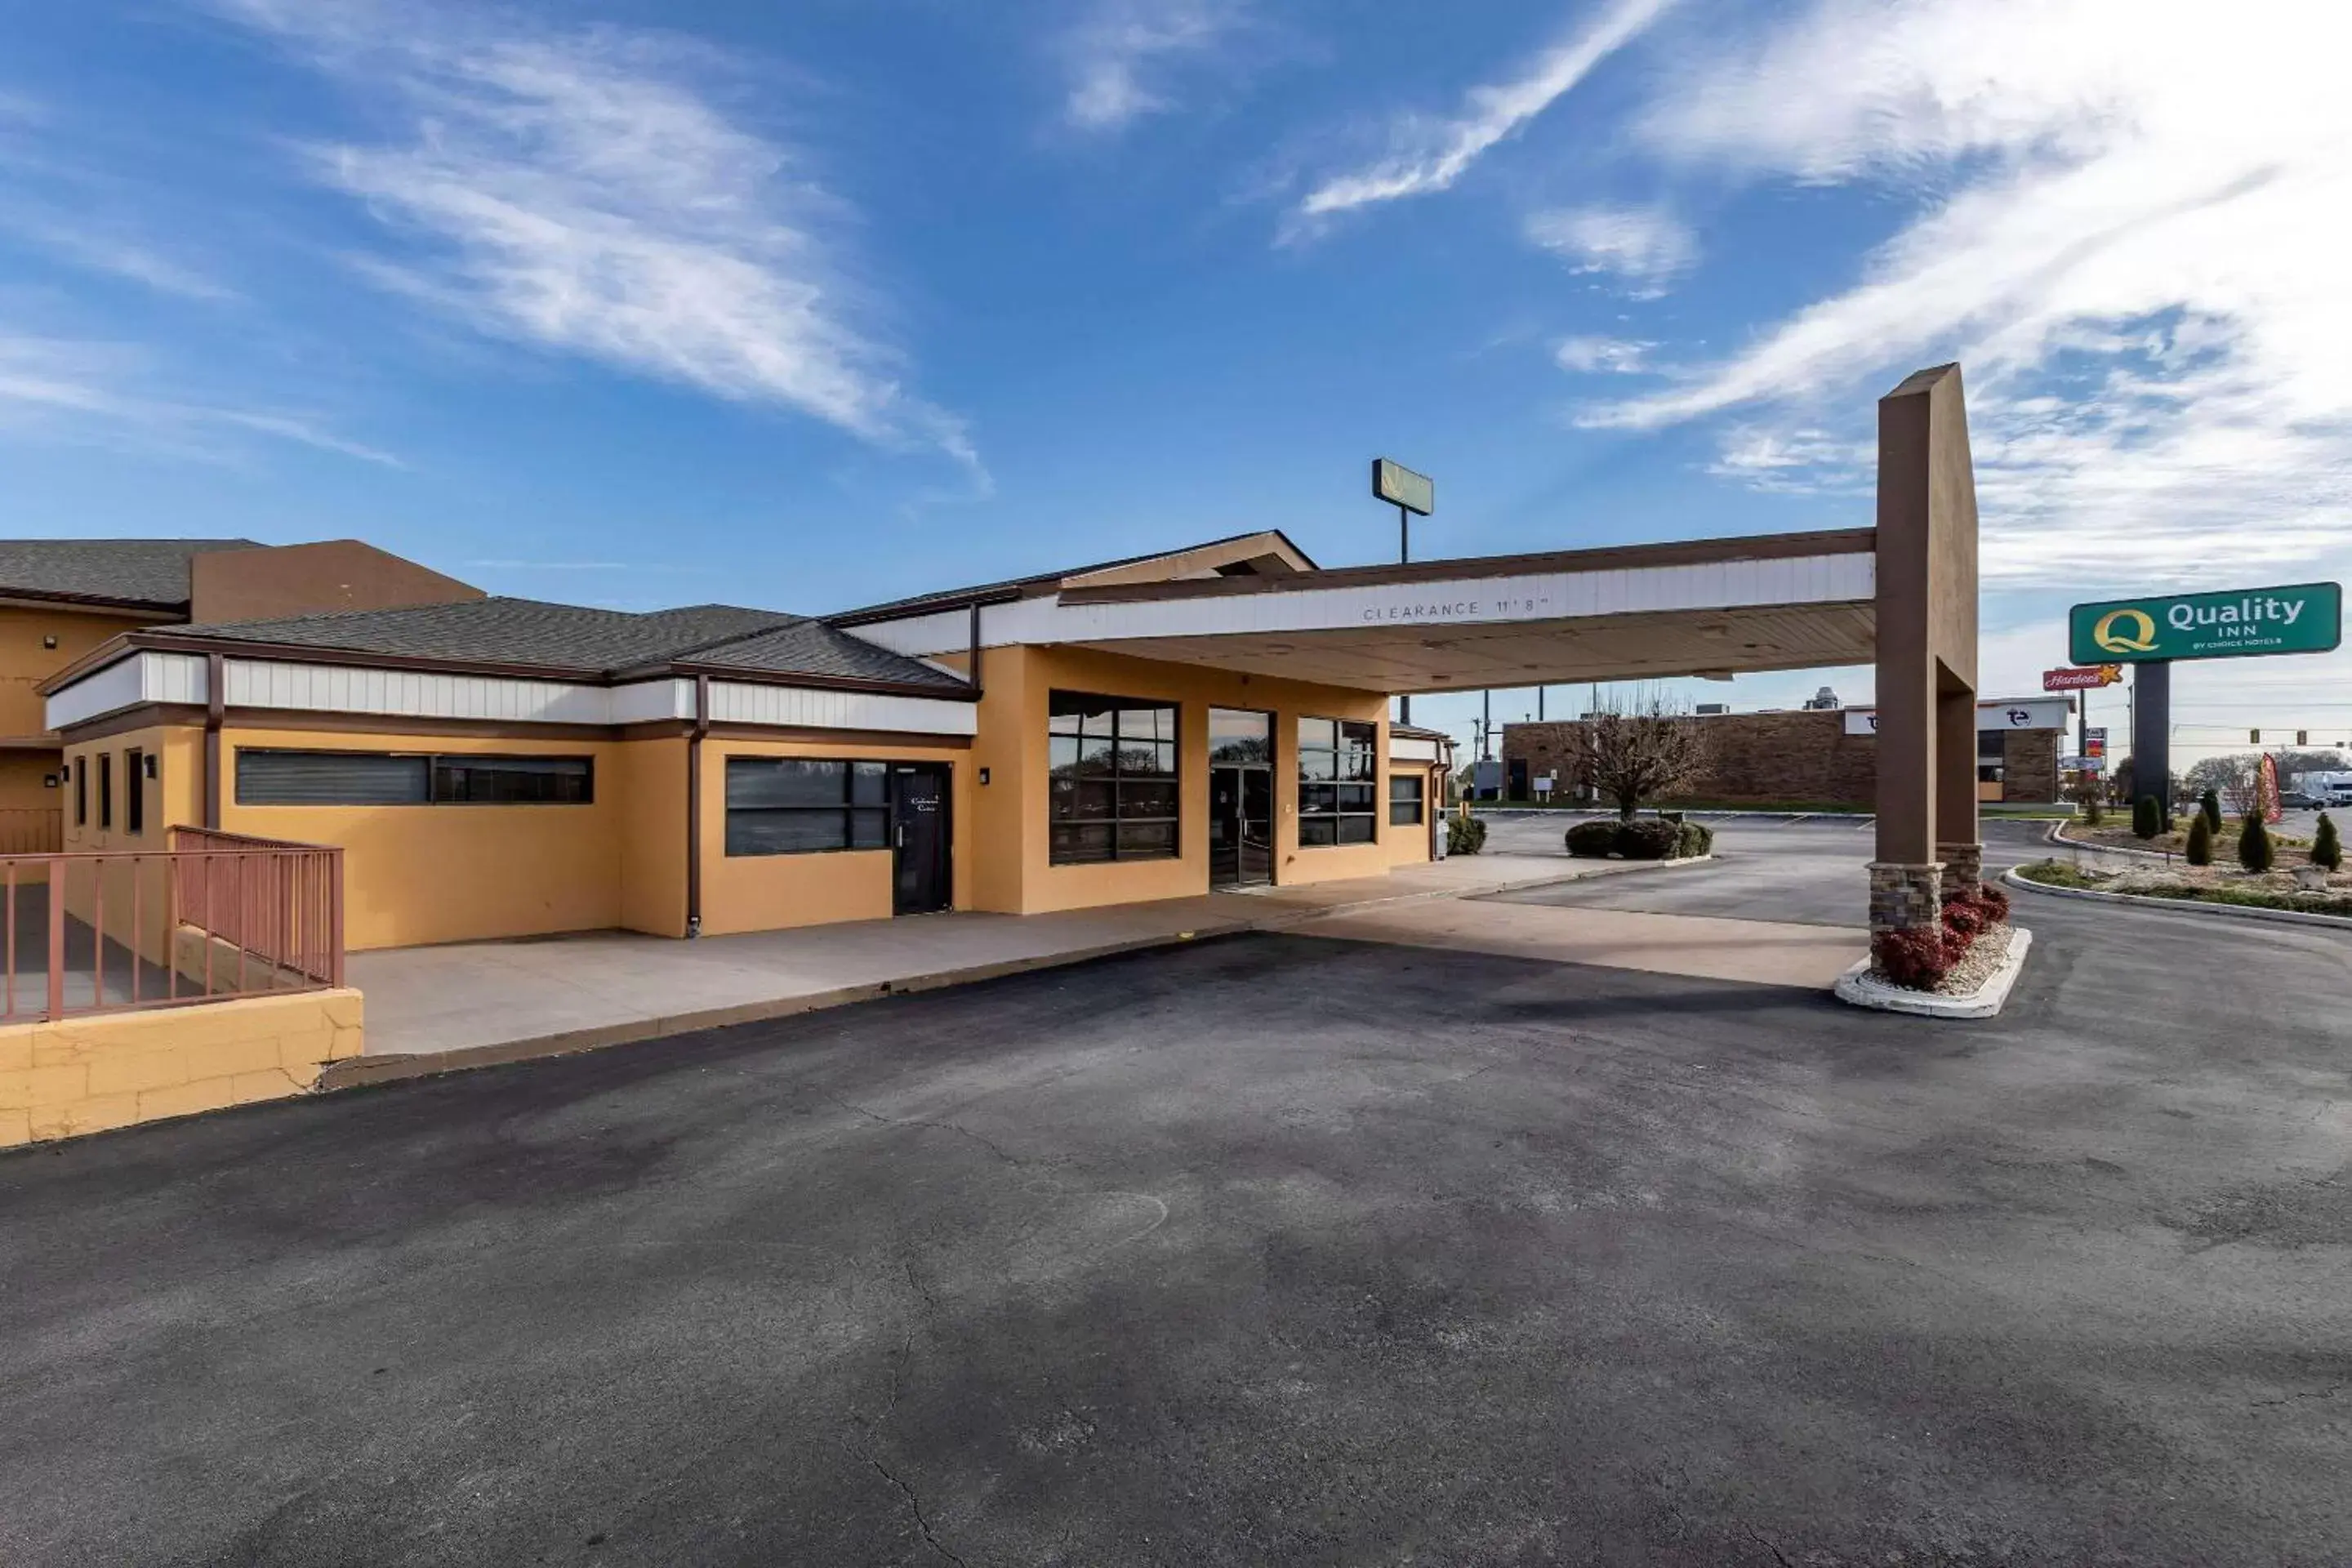 Property Building in Quality Inn South Duncan